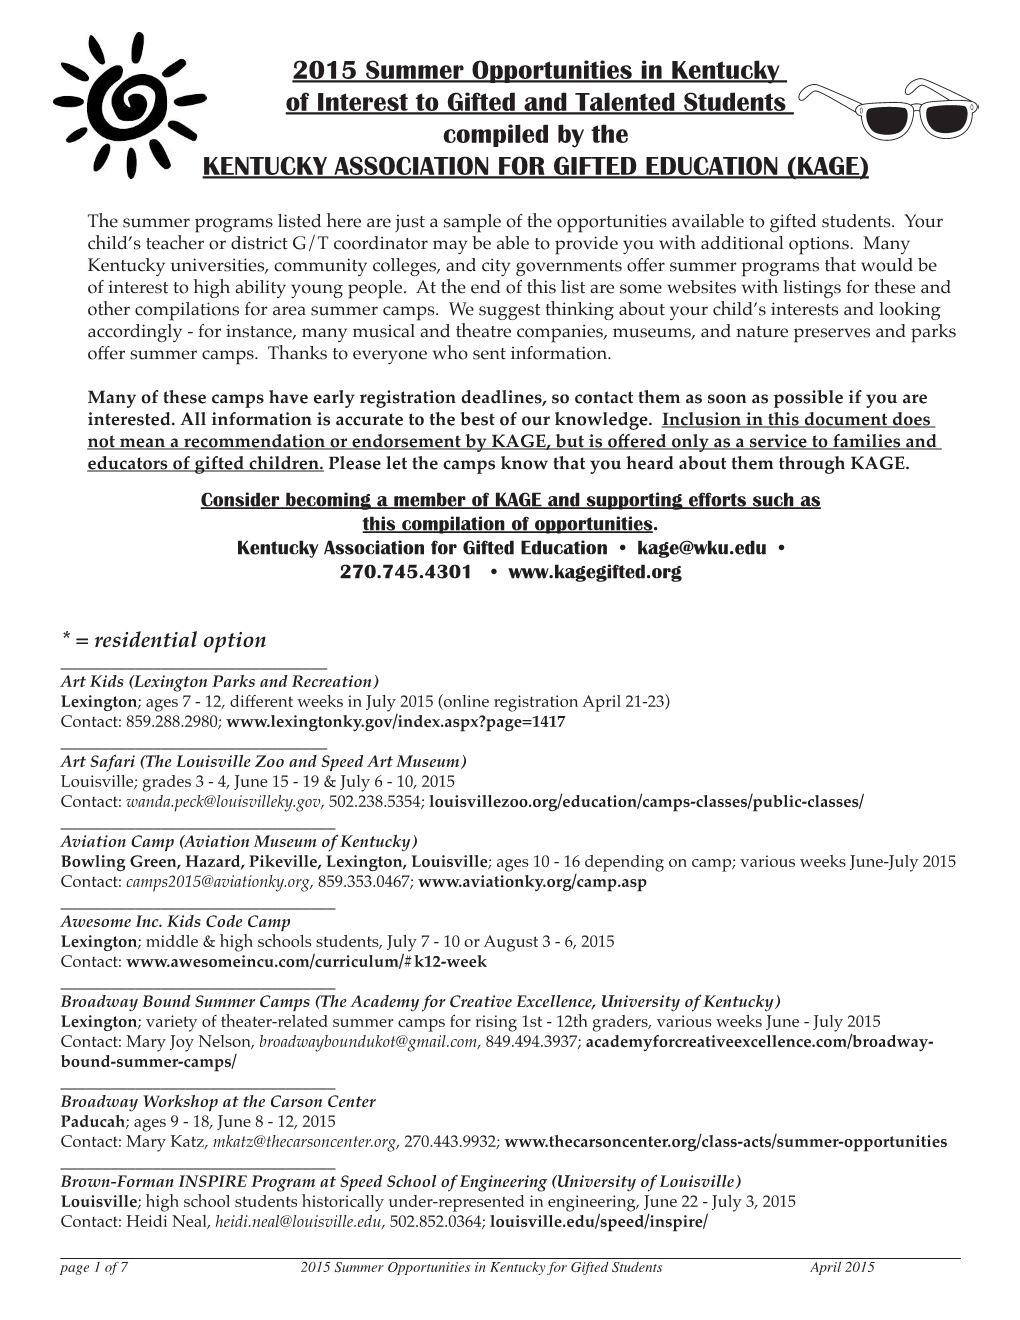 2015 Summer Opportunities in Kentucky of Interest to Gifted and Talented Students Compiled by the KENTUCKY ASSOCIATION for GIFTED EDUCATION (KAGE)